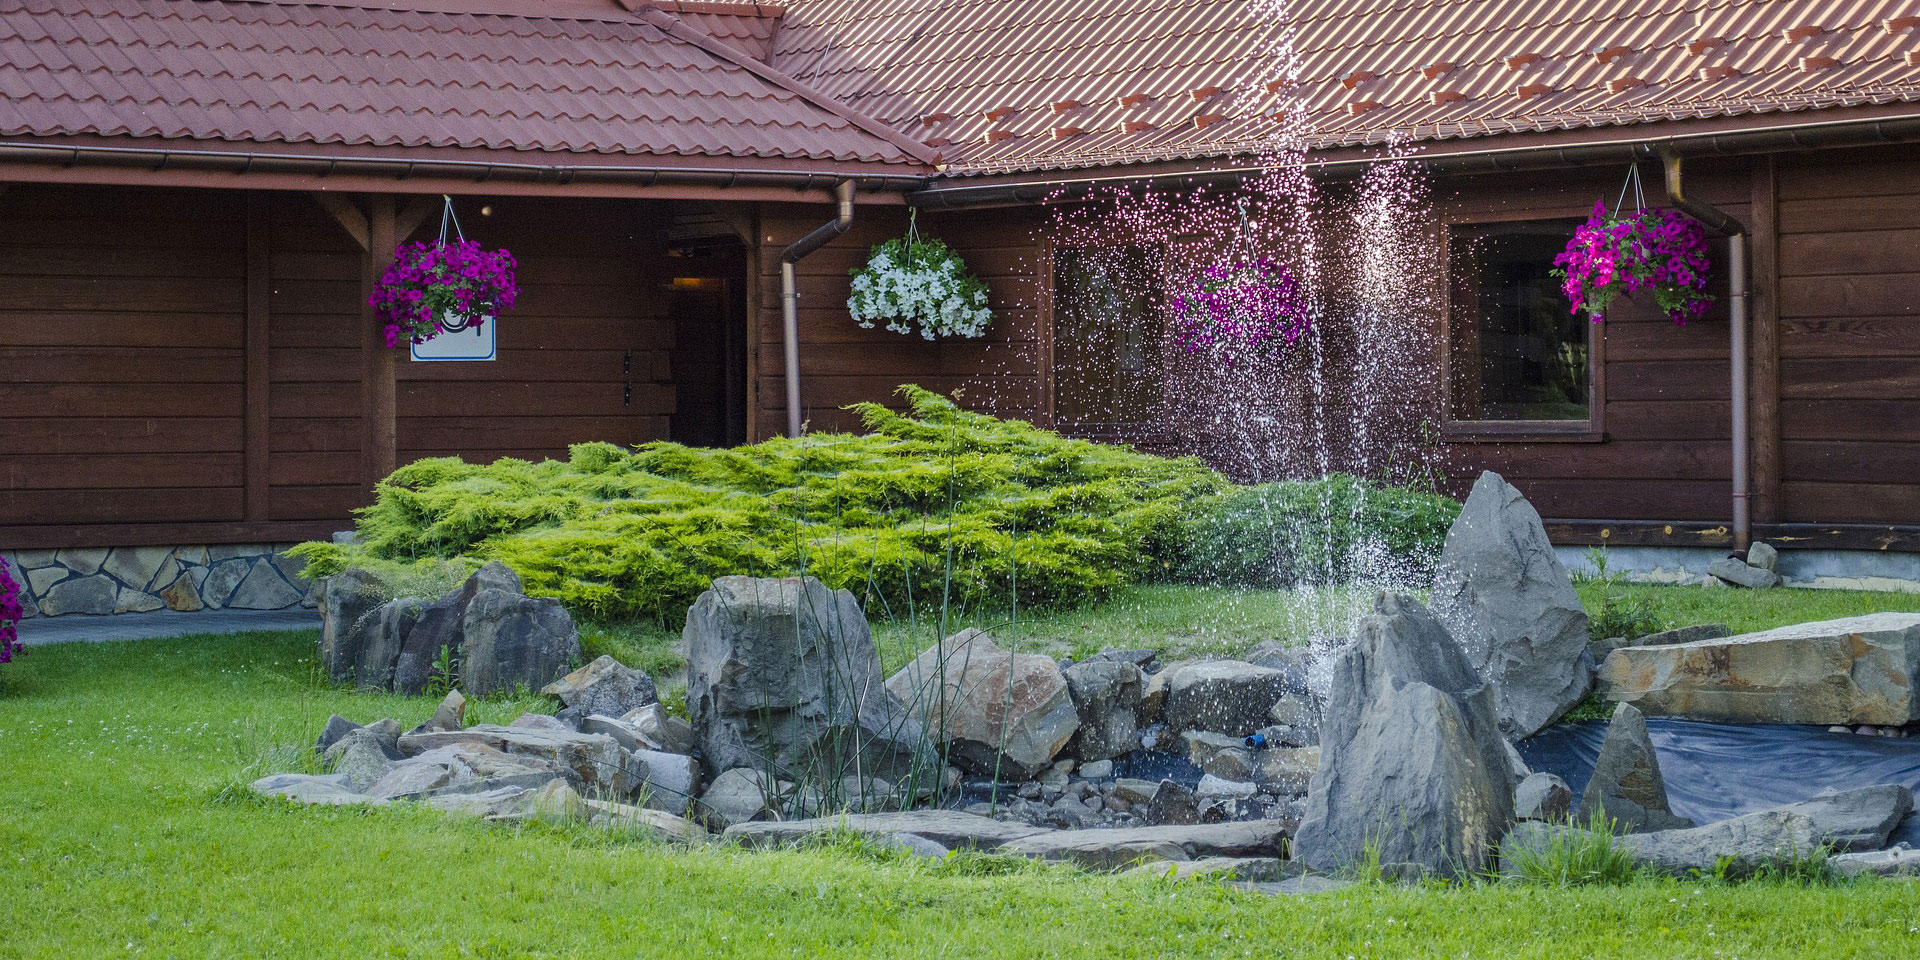 Water features not only visually improve your landscaping, they are often functional as well!